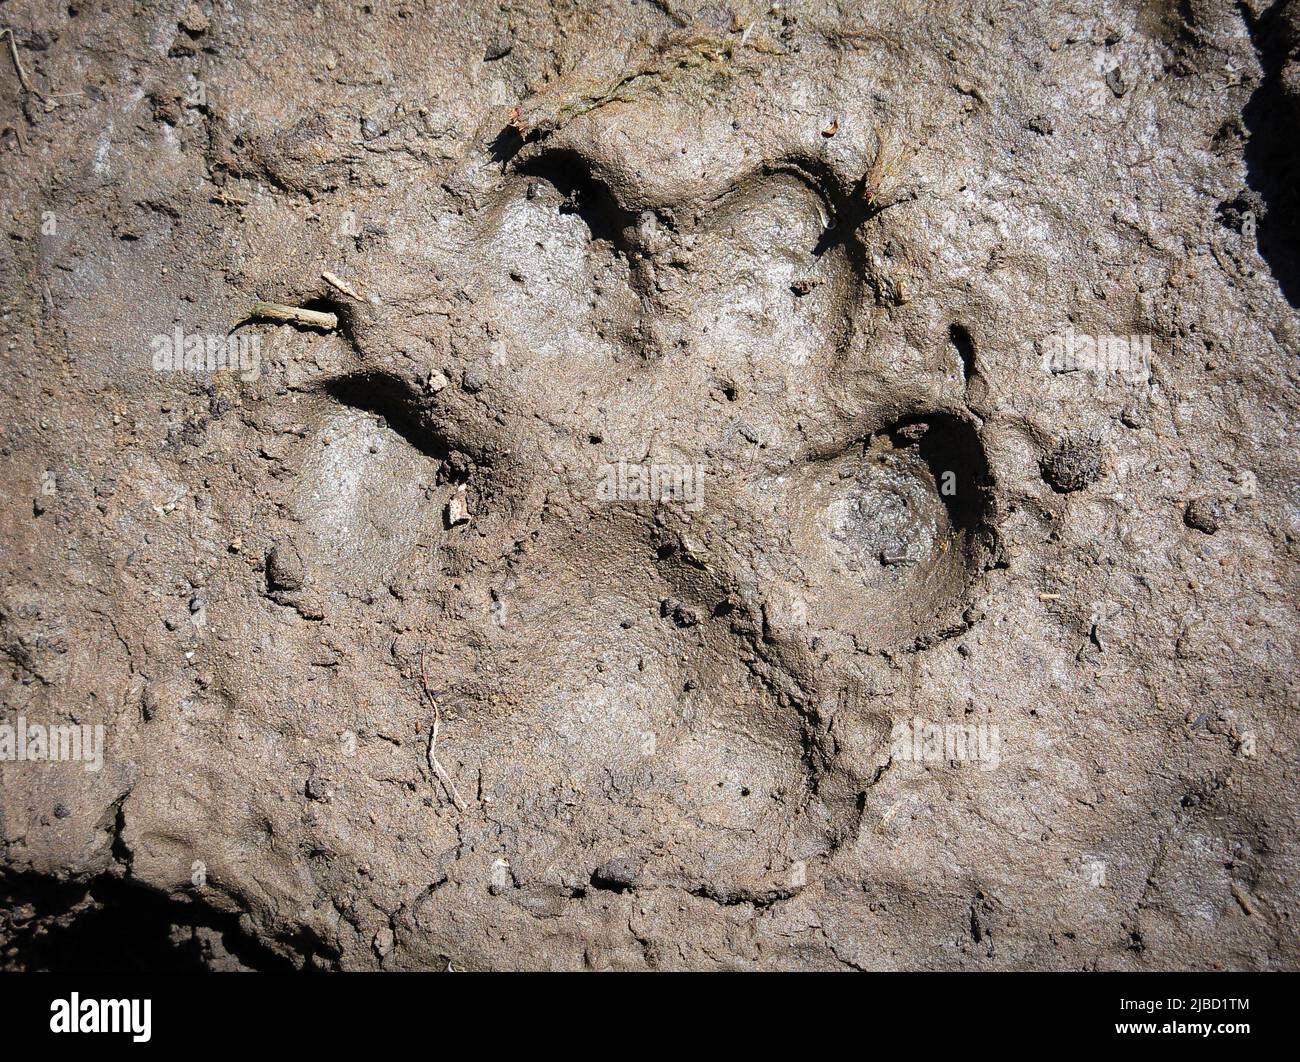 mountain lion cougar foot track in mud Stock Photo